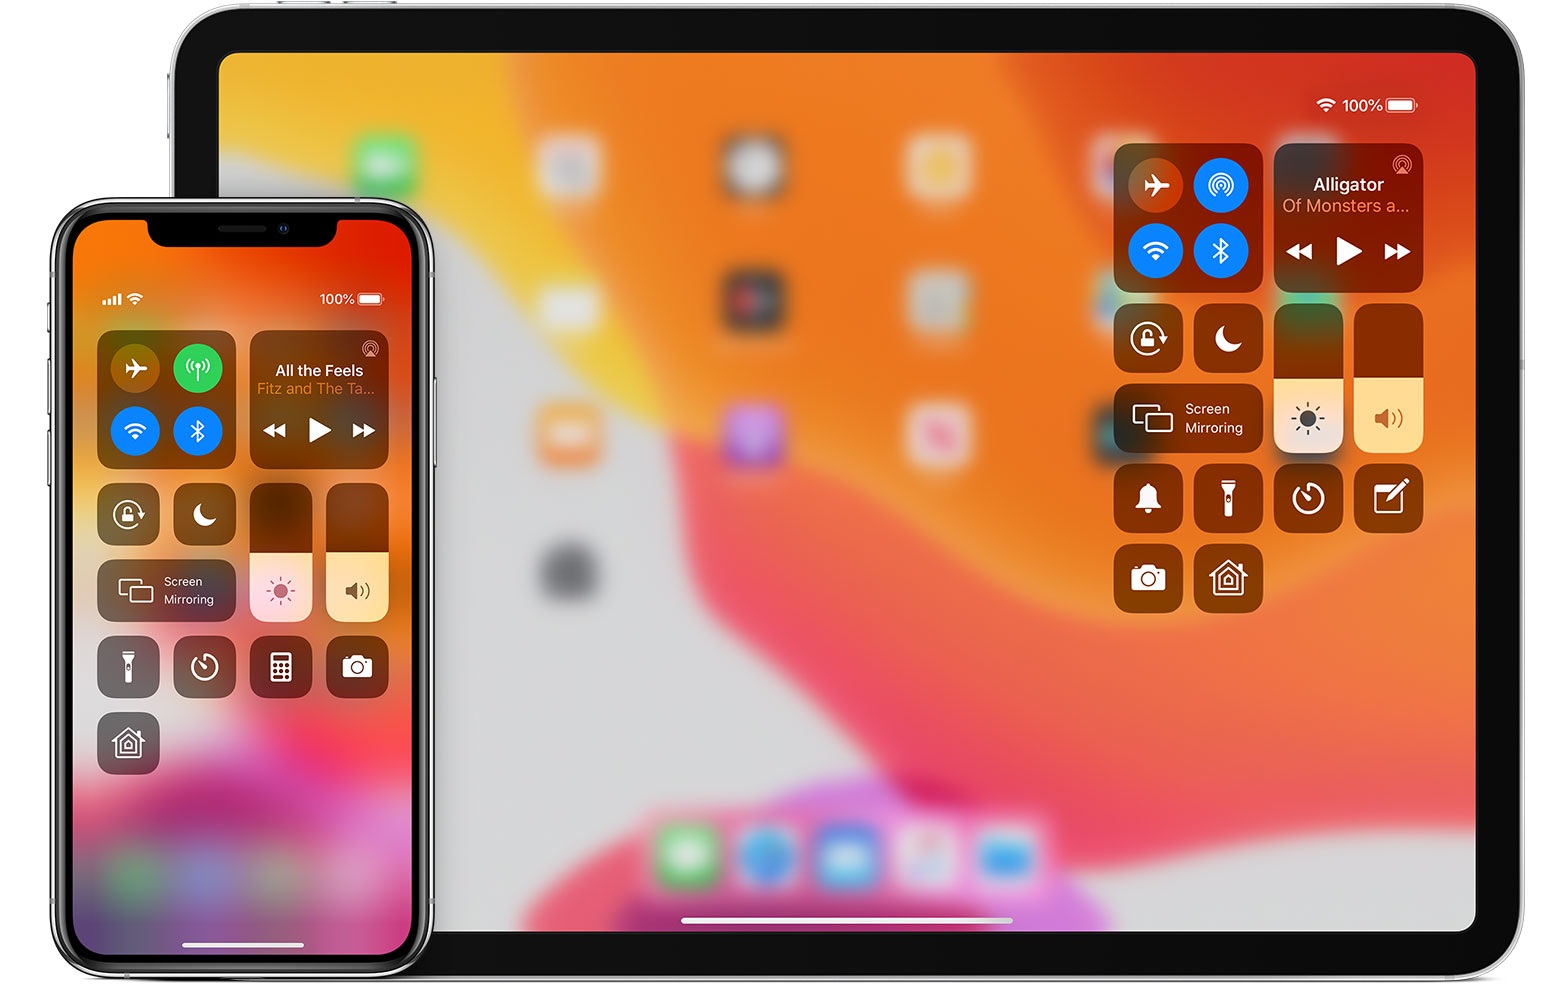 How To Use Control Center On IPhone, IPad, And IPod Touch